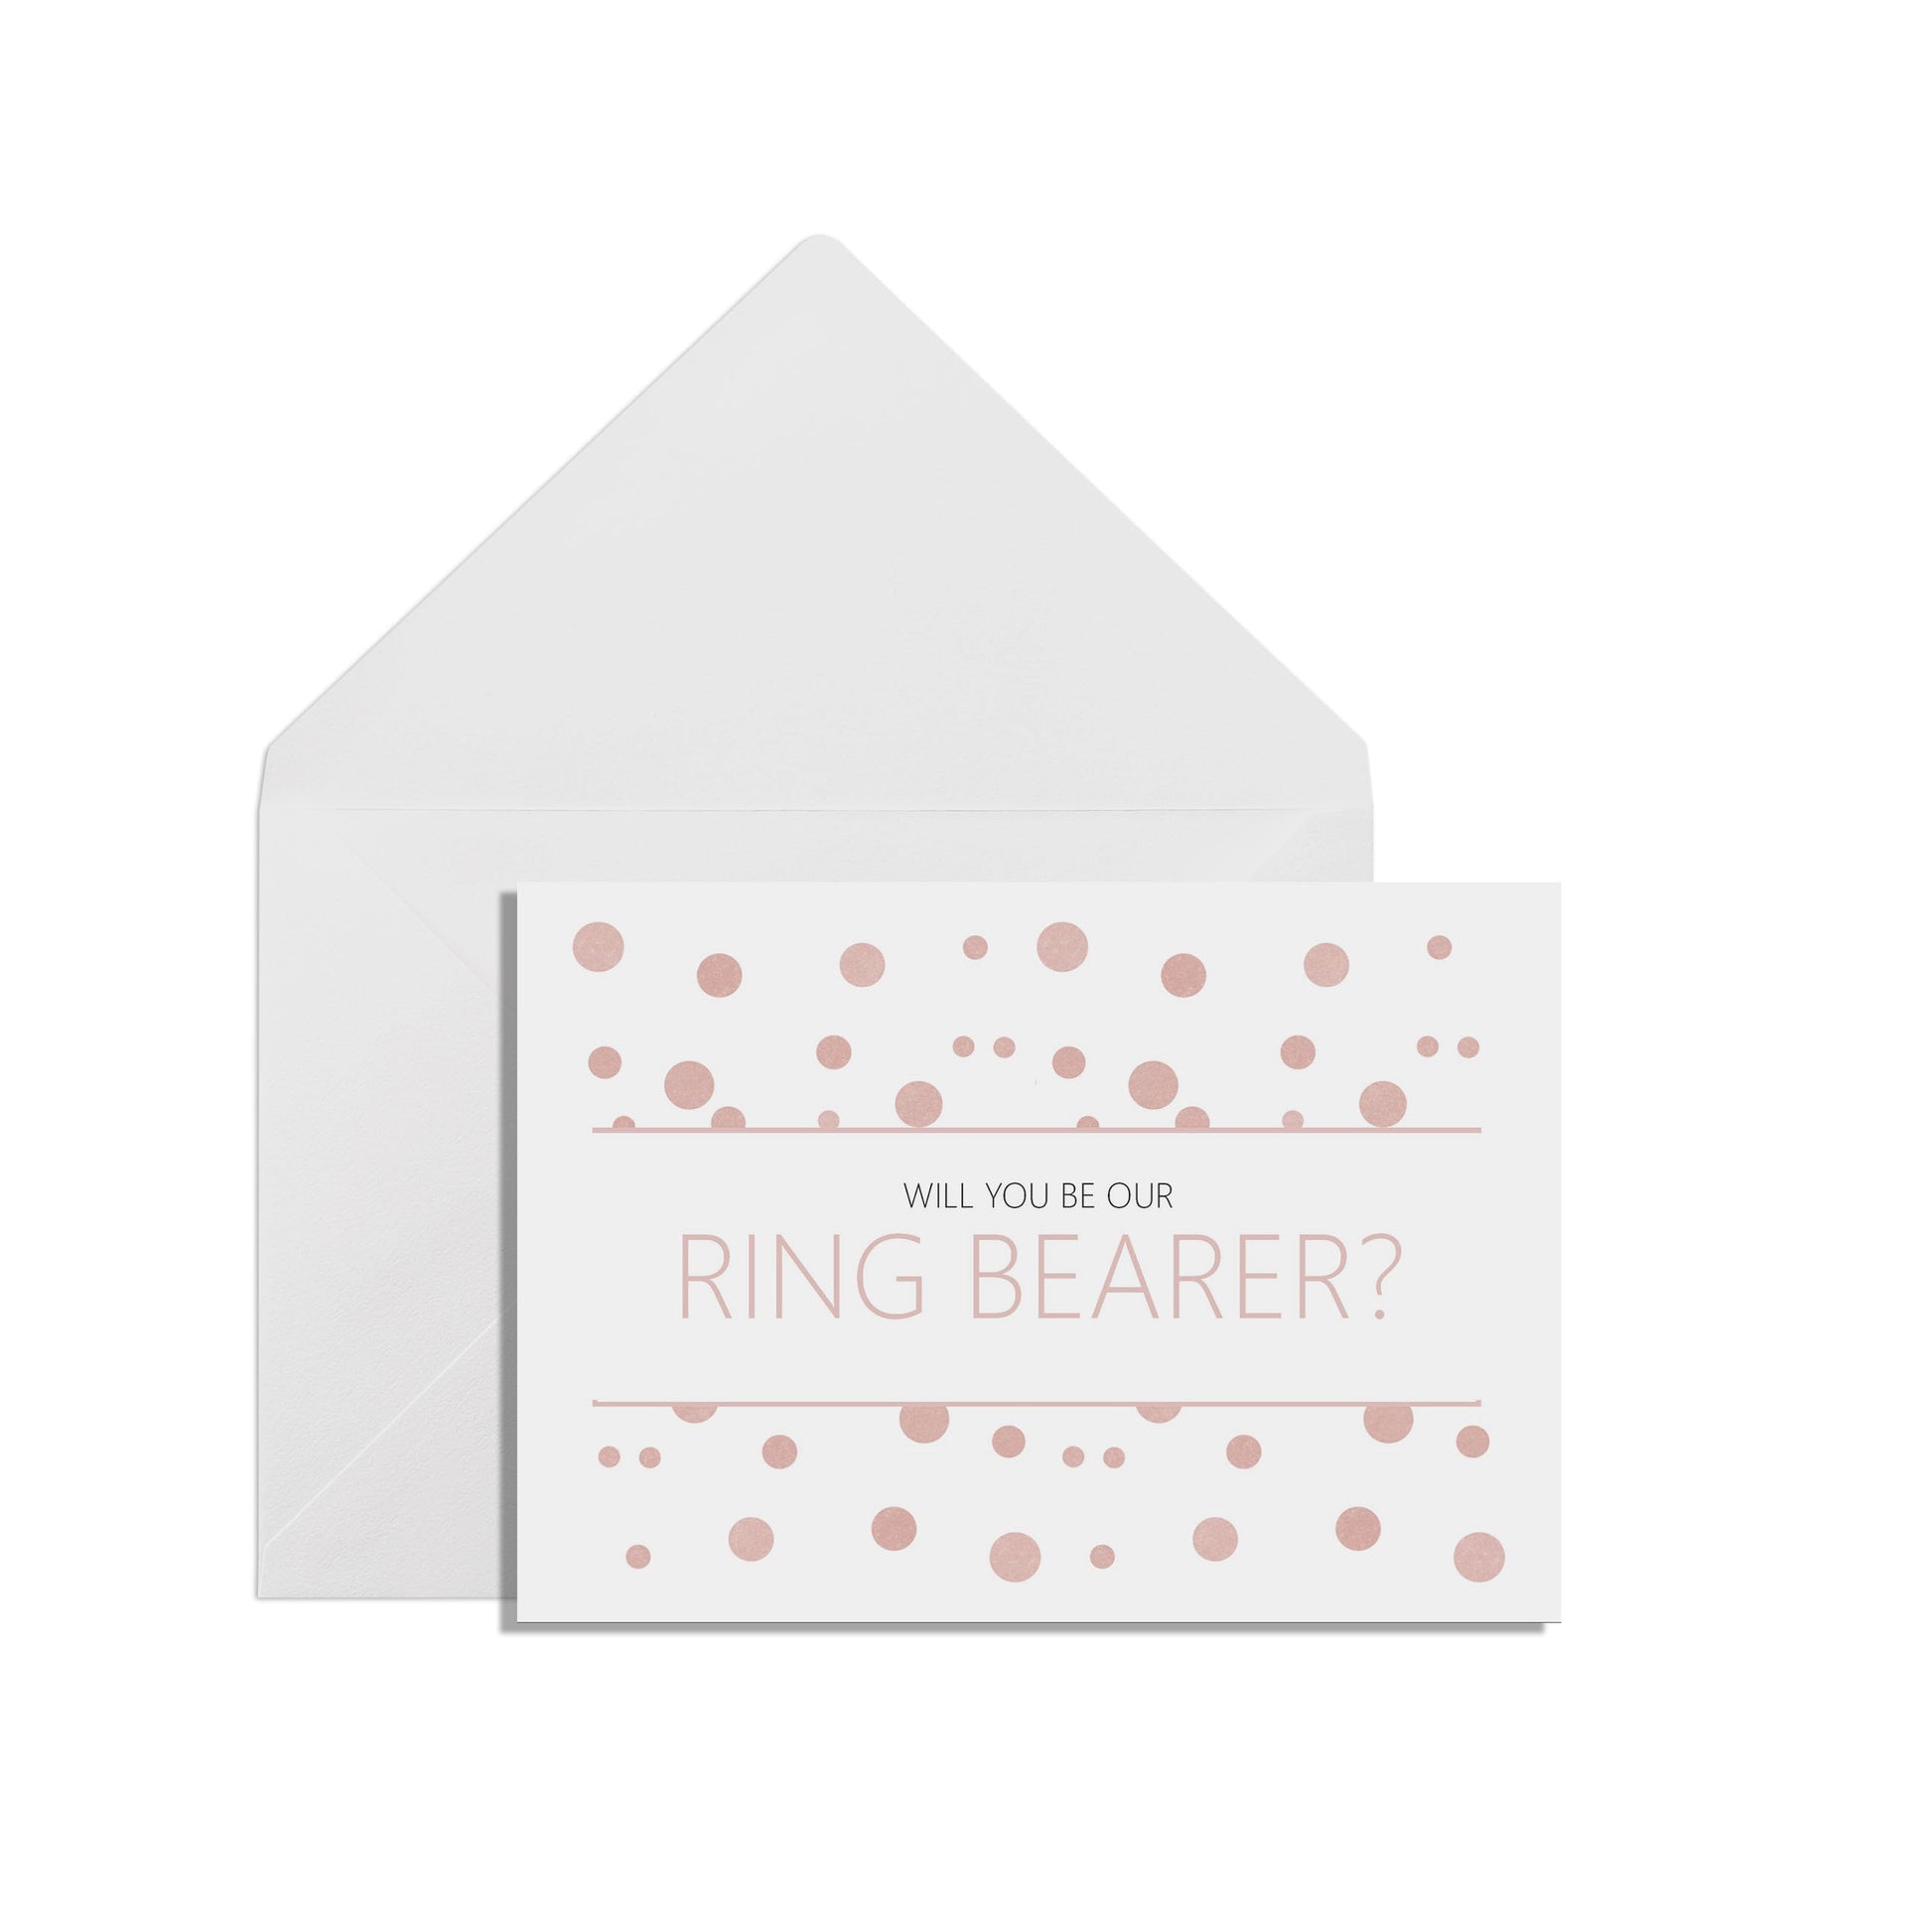 Will You Be Our Ring Bearer? A6 Blush Confetti Wedding Proposal Card With White Envelope